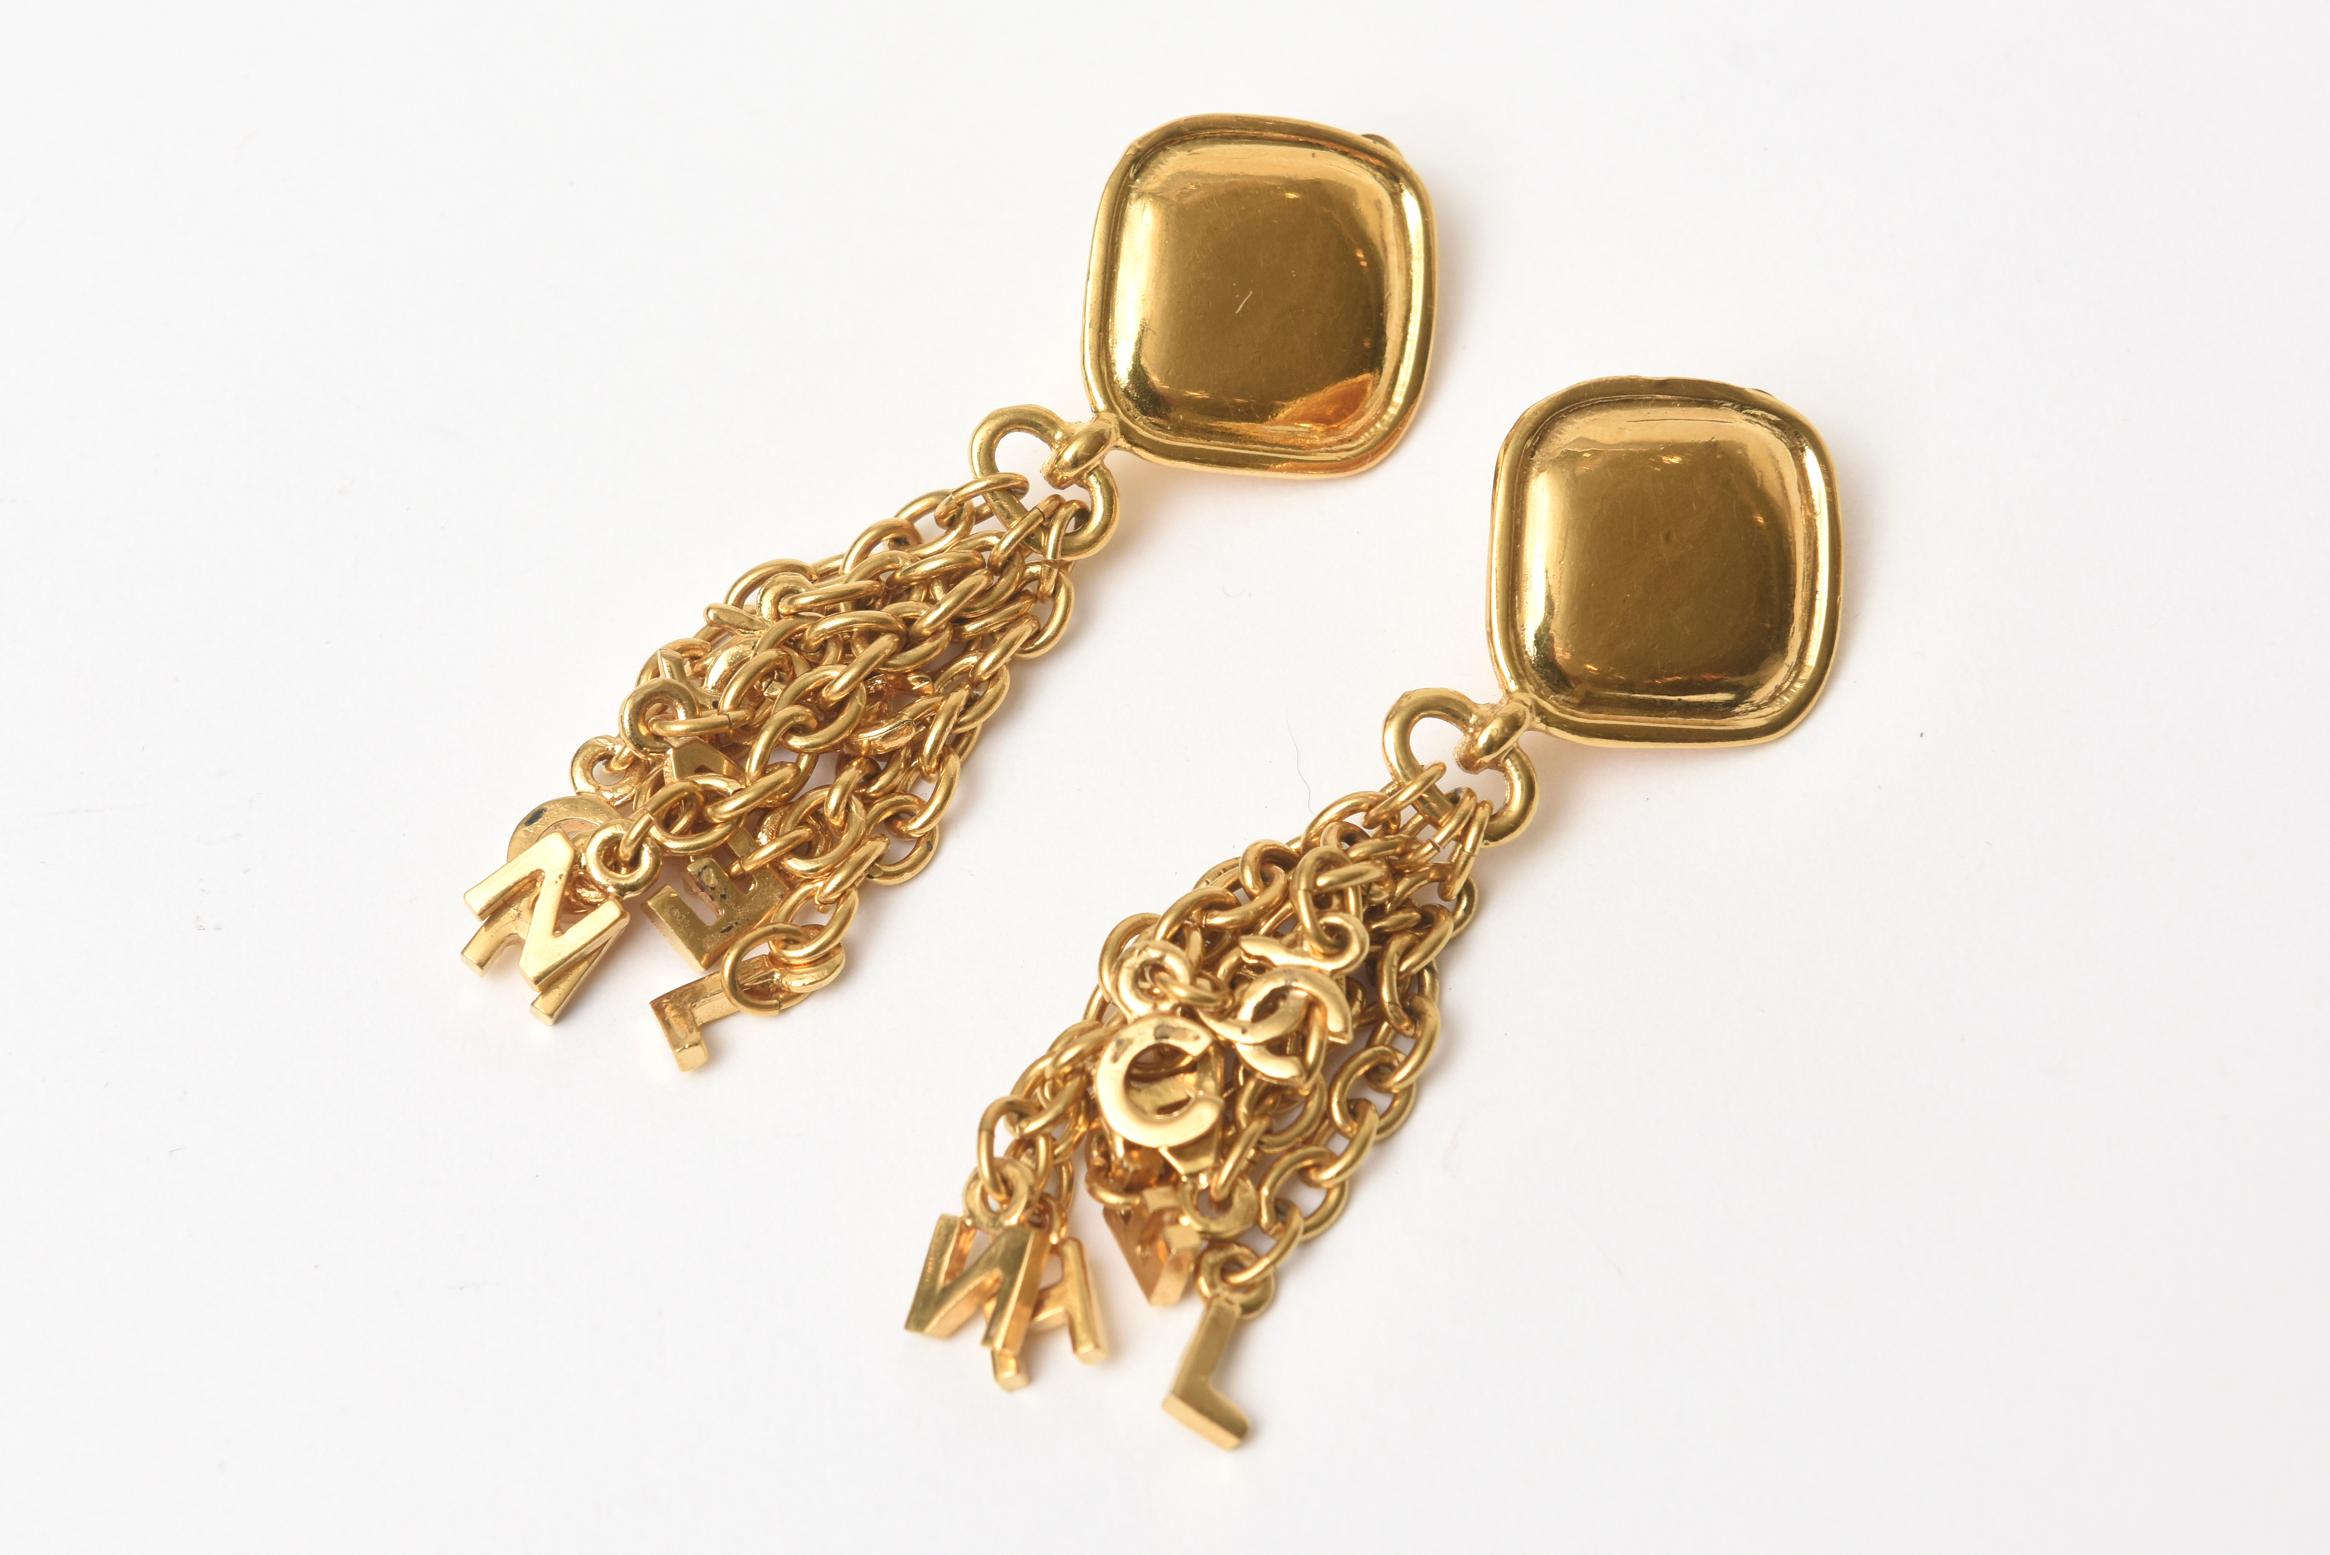 These fun, chic yet sophisticated Chanel clip on dangle earrings have charm like pendants in chain form hanging from the top with CC's. They are gold plated and are dramatic. They are from the 20th century of the 90's. They can go all seasons day to